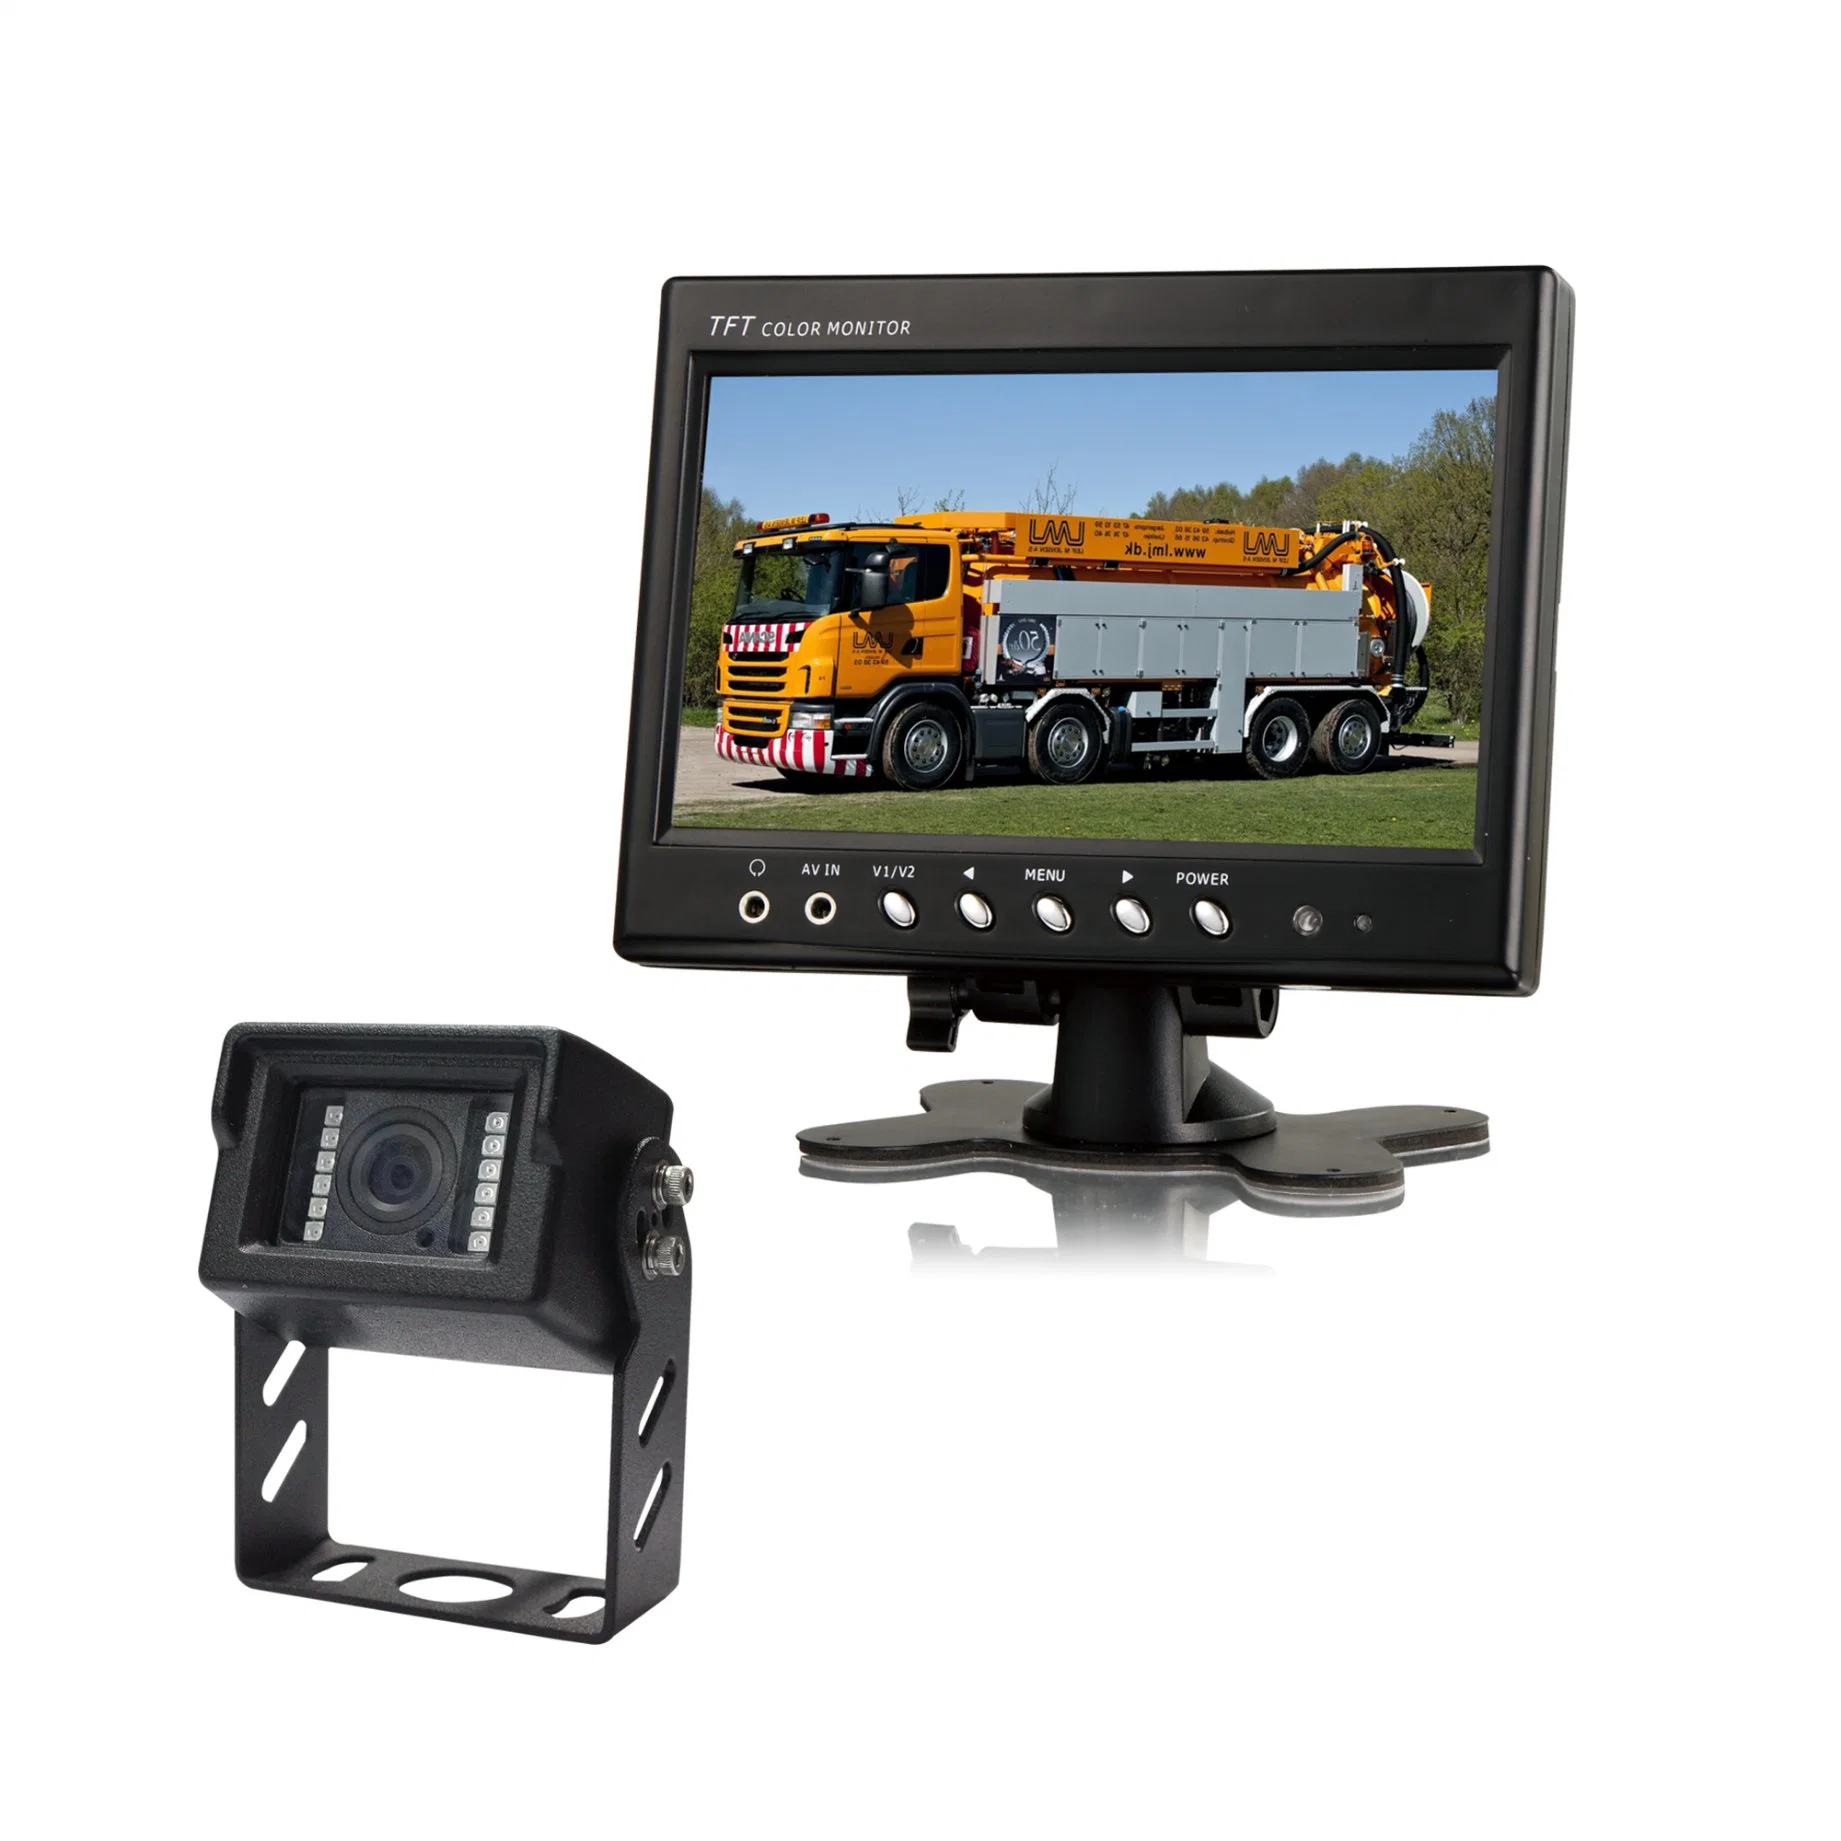 7 Inch TFT LCD Monitor for Car Bus Vehicle CCTV Security System